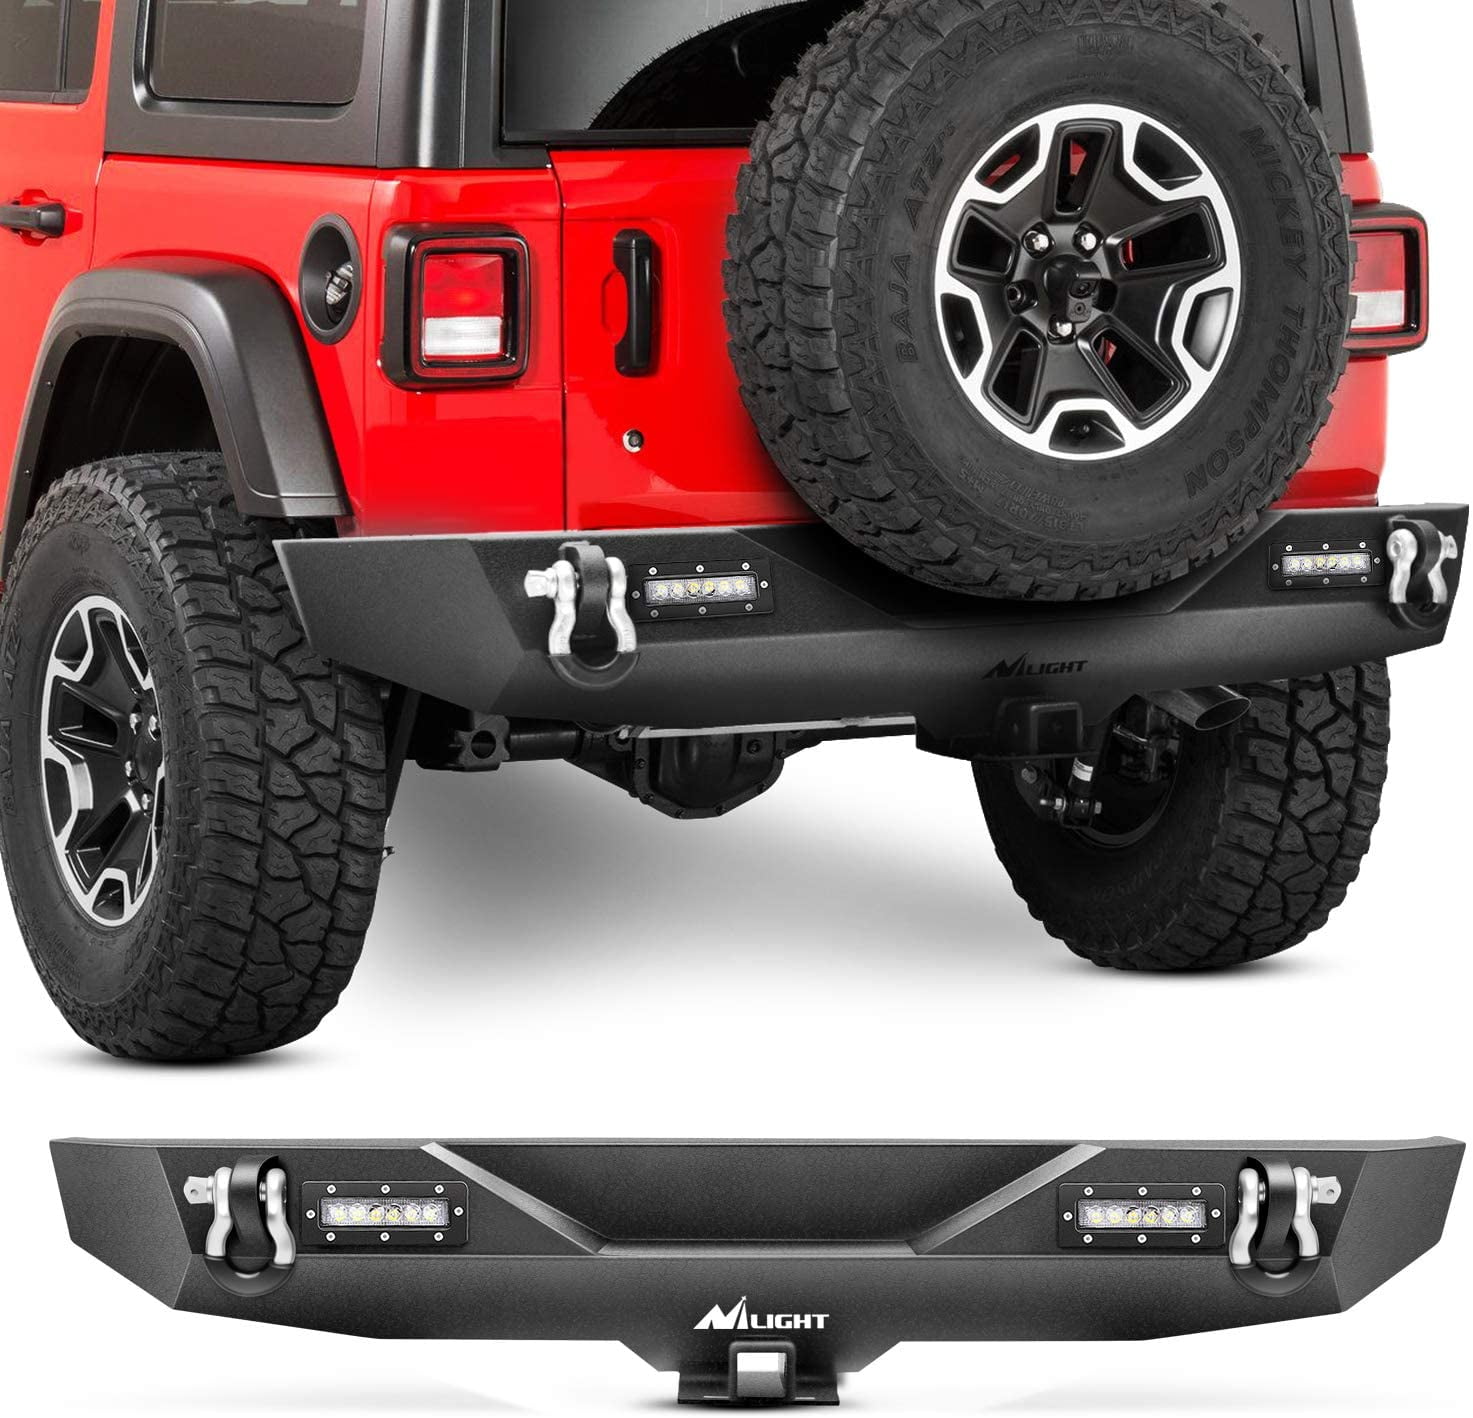 Nilight Rear Bumper Compatible for 2018 2019 2020 2021 2022 Jeep Wrangler  JL Rock Crawler Bumper with Hitch Receiver & 2X Upgraded 18W LED Lights Off  Road Textured Black 